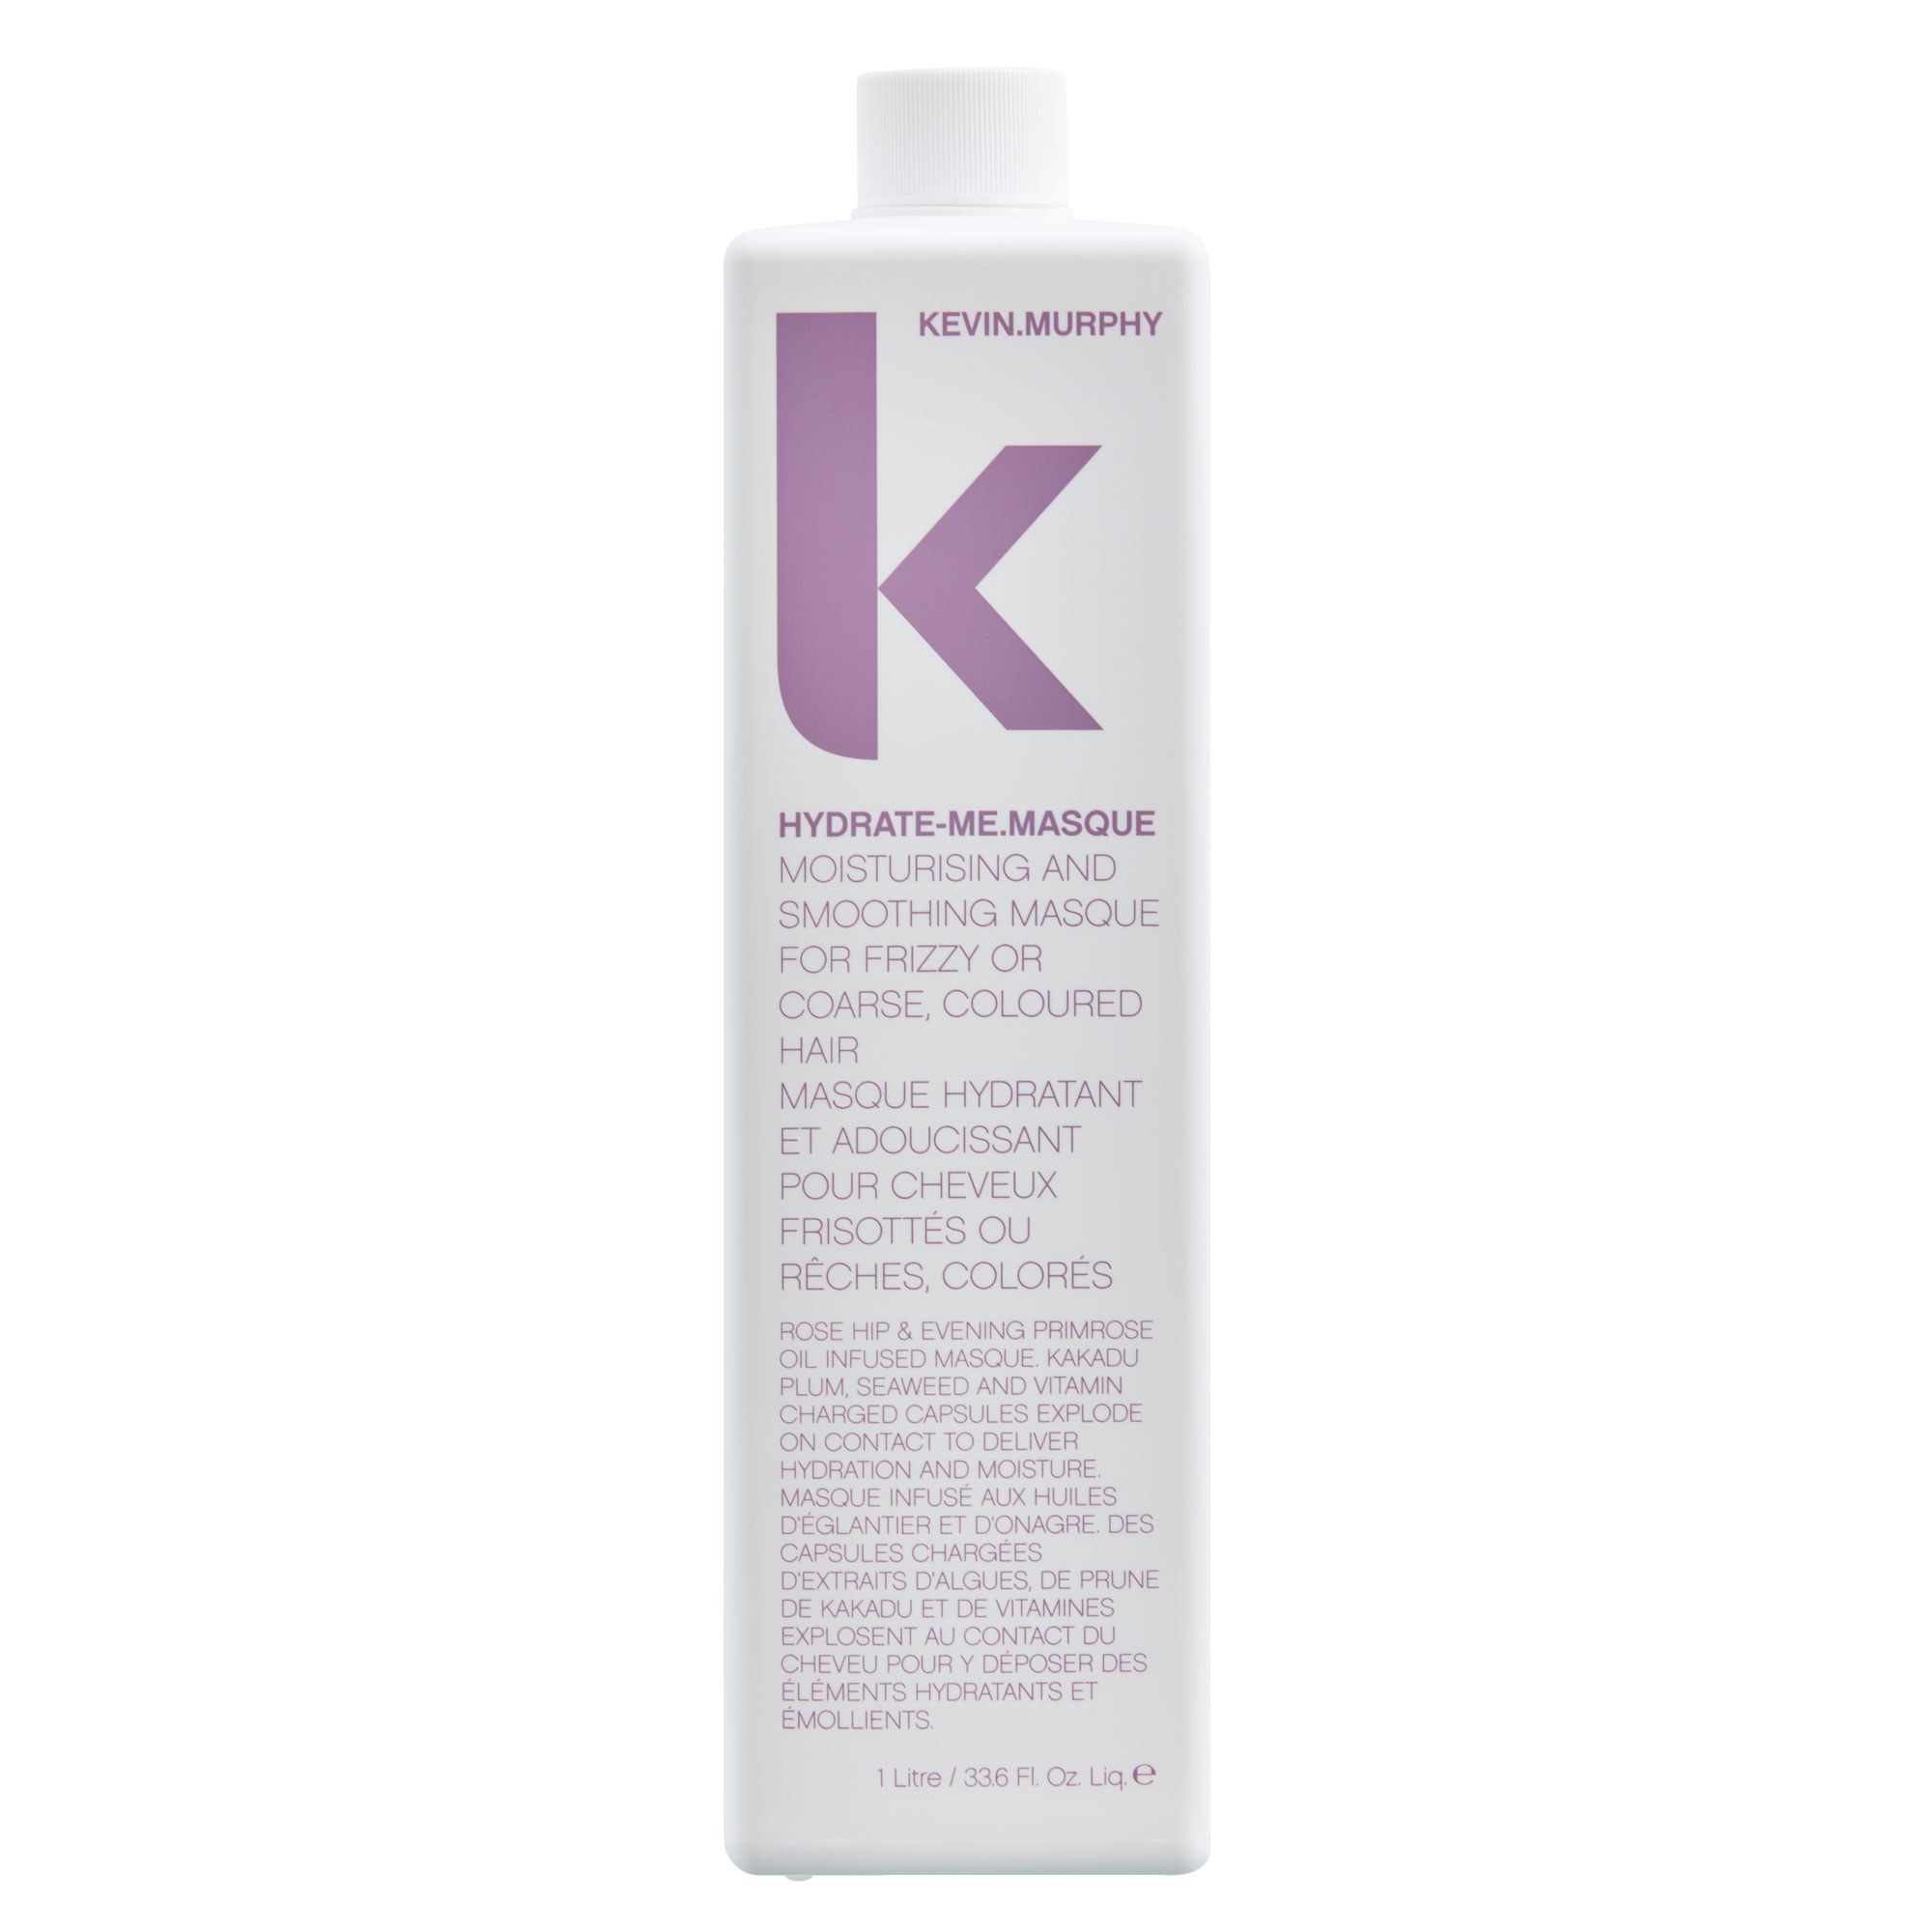 KEVIN.MURPHY HYDRATE-ME.MASQUE 1liter